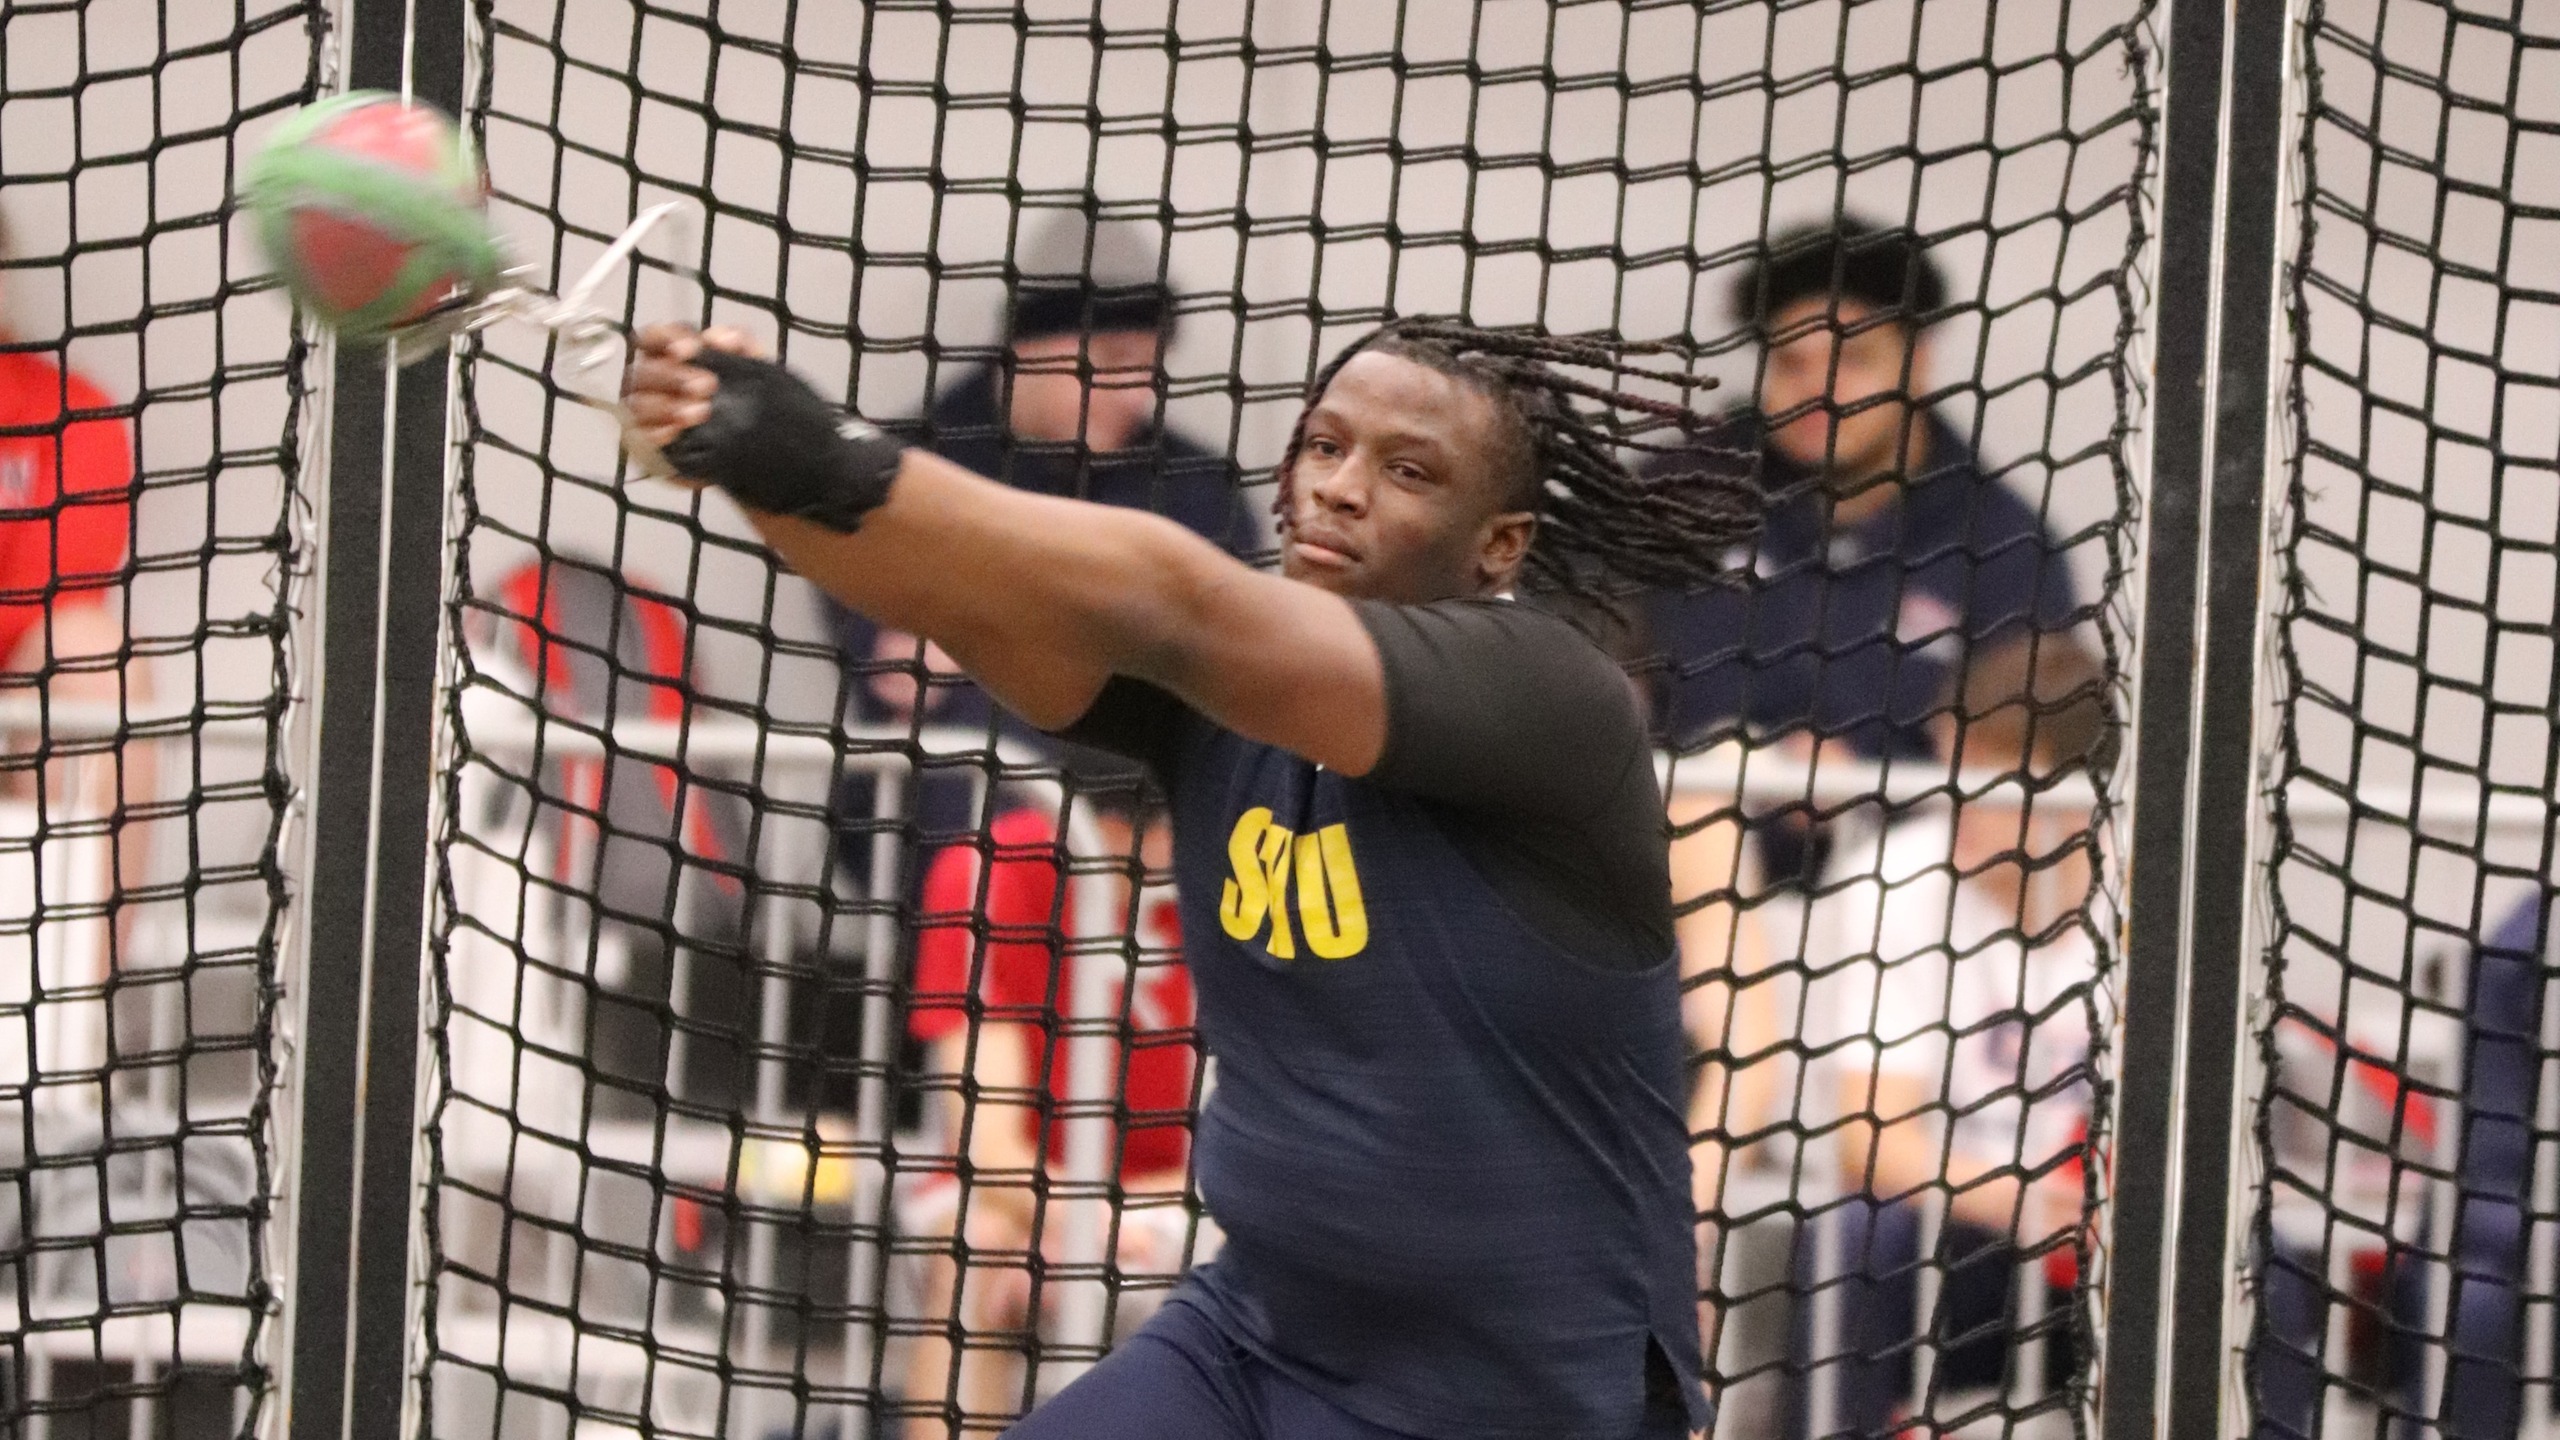 Leupold, Harris Win Events over Weekend for Men's Track and Field